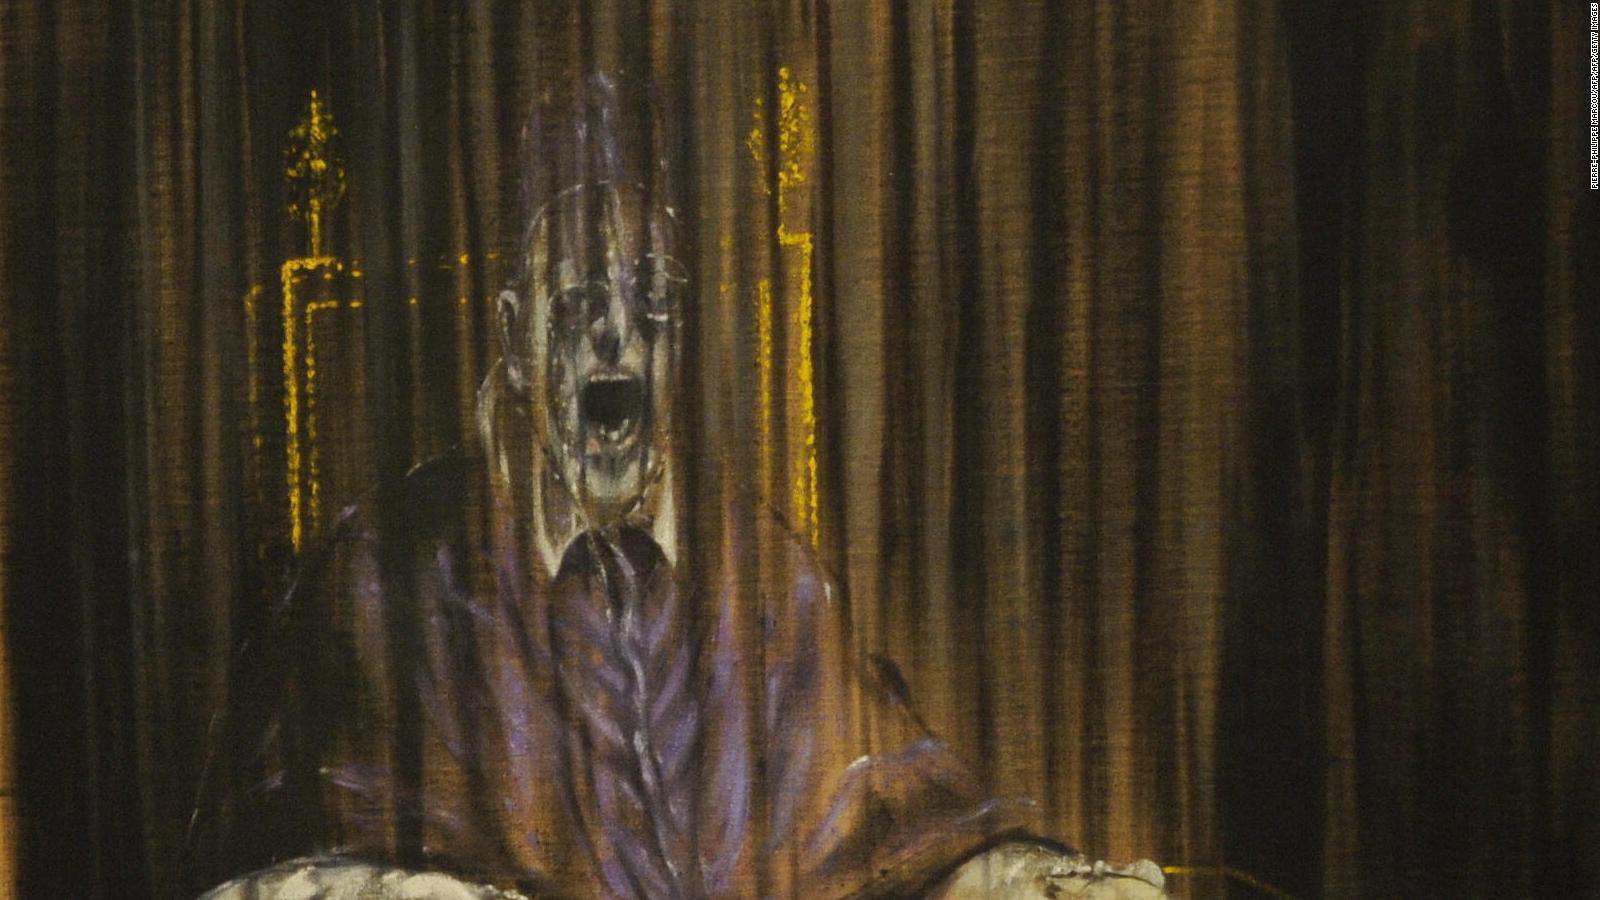 Francis Bacon S Portraits Of Screaming Popes And Lovers Live On